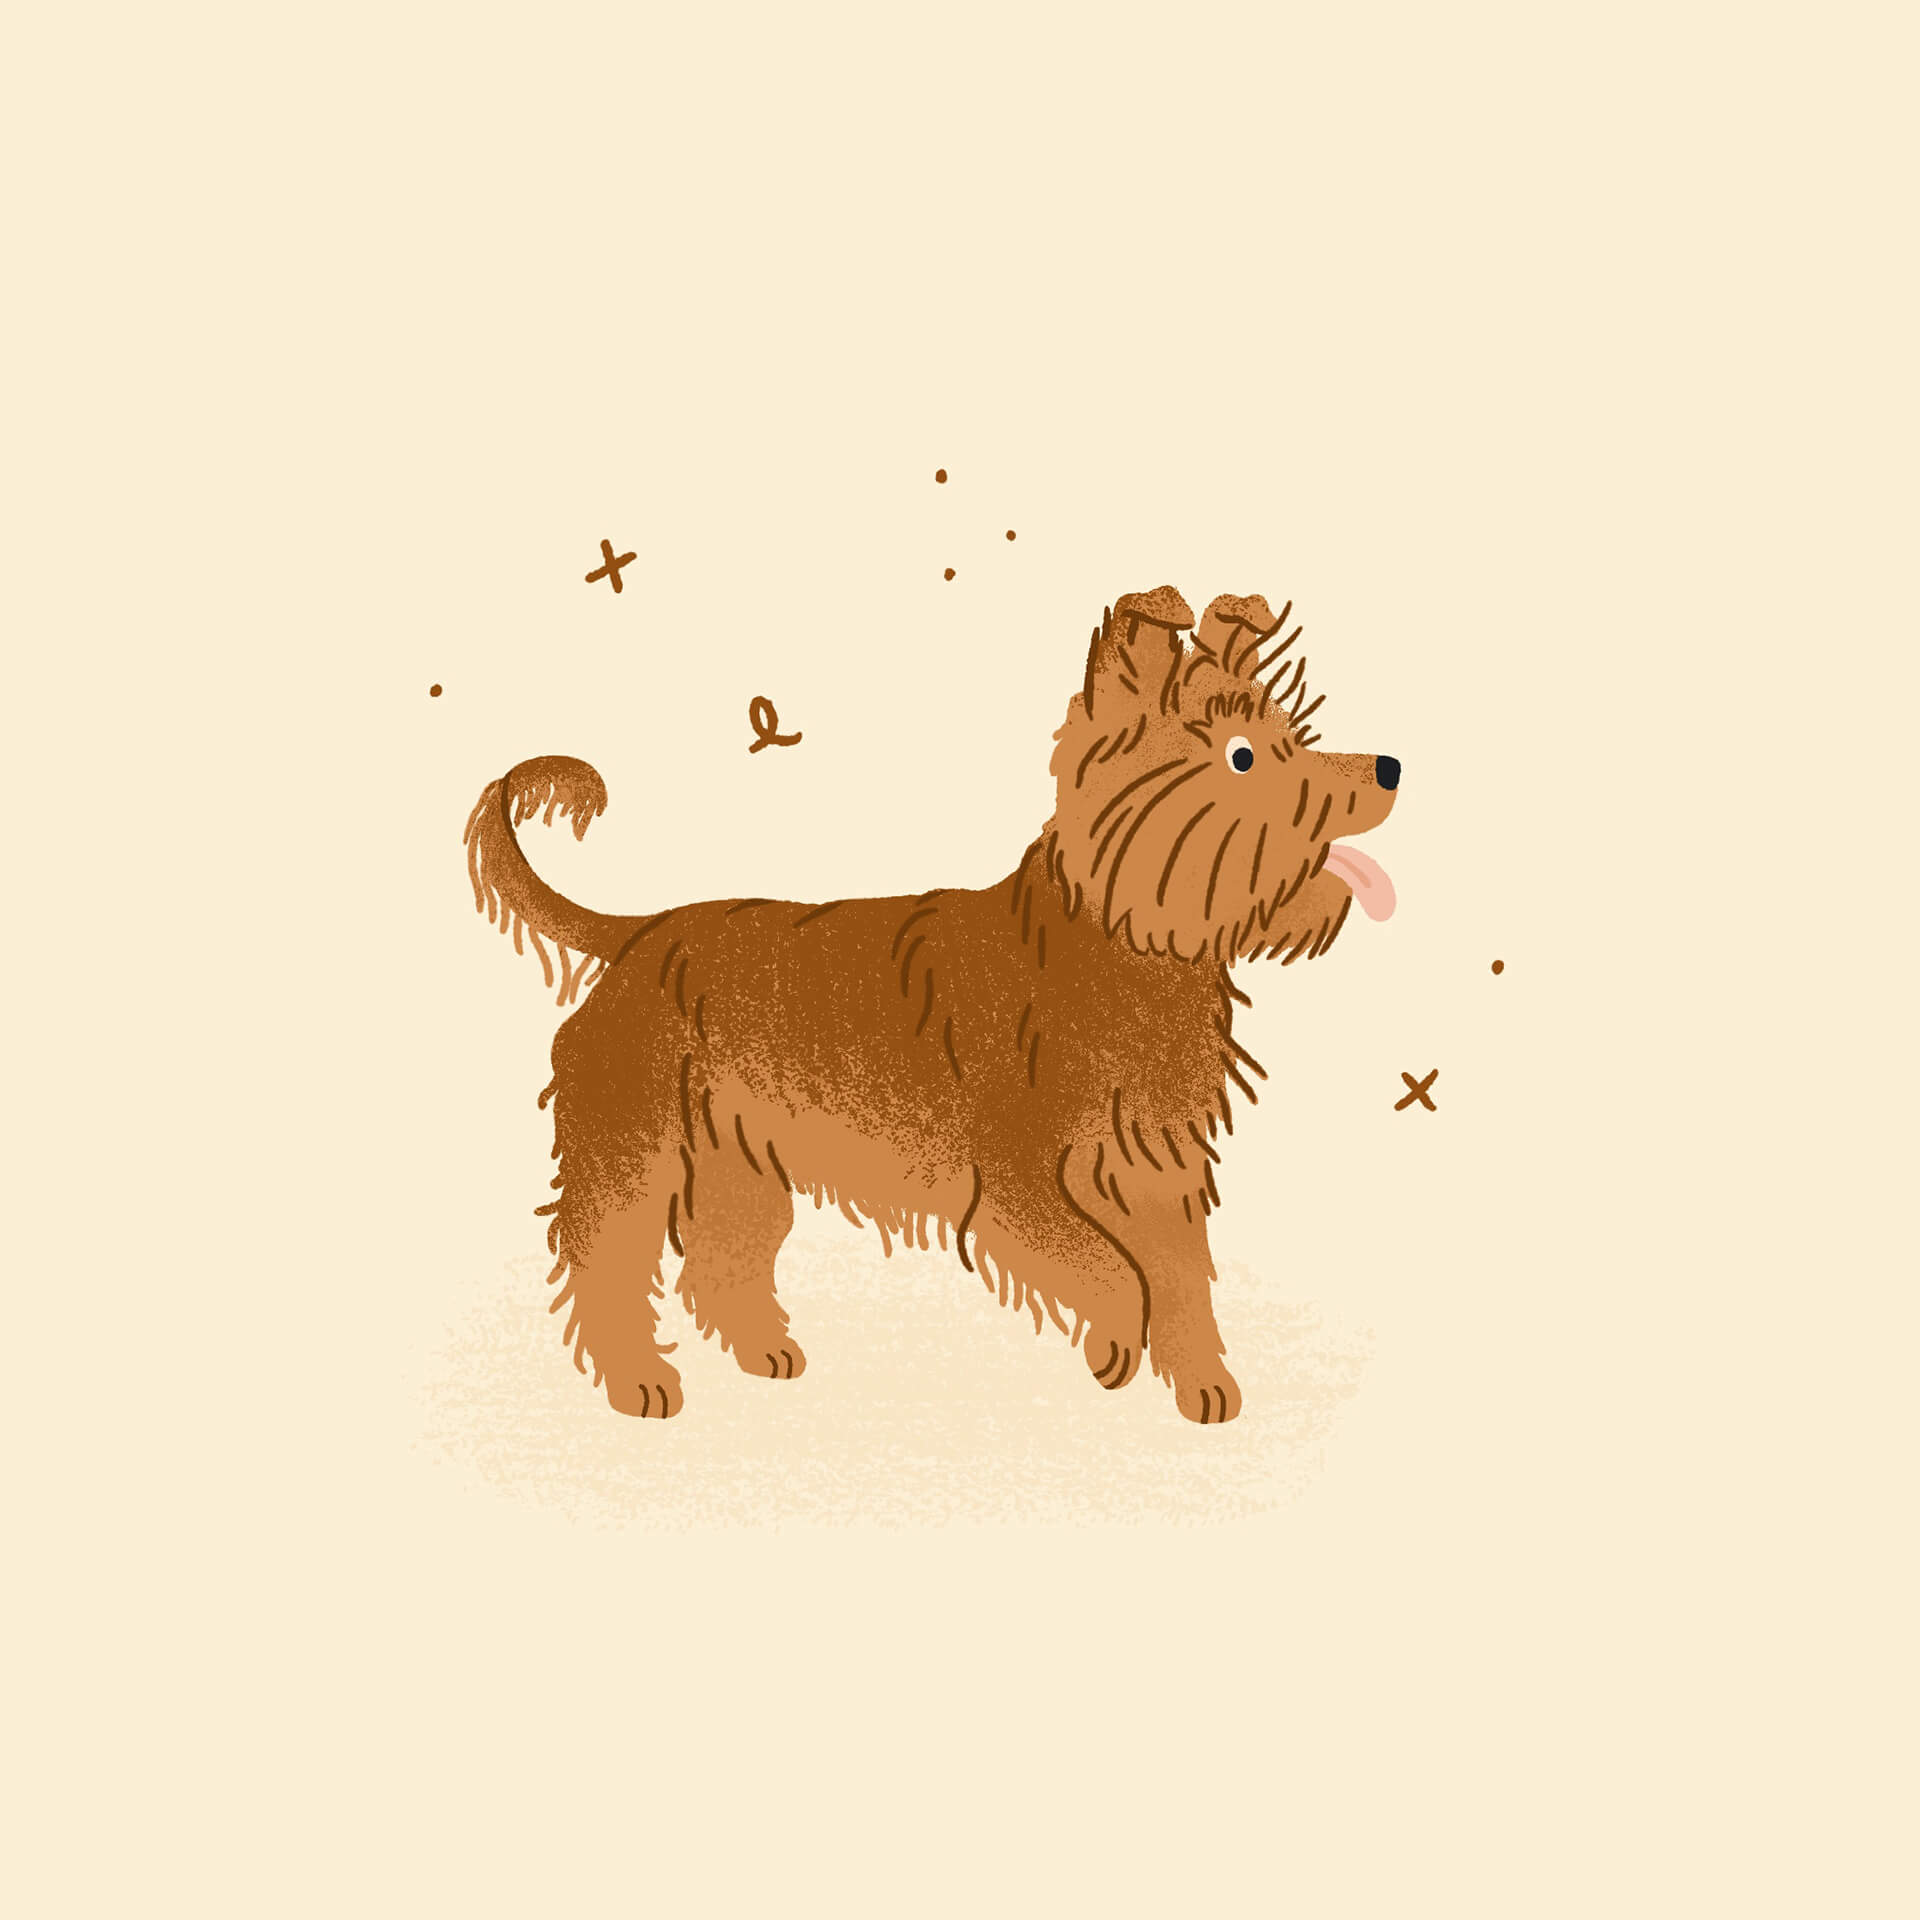 An illustration of a yorkshire terrier standing with its paw raised